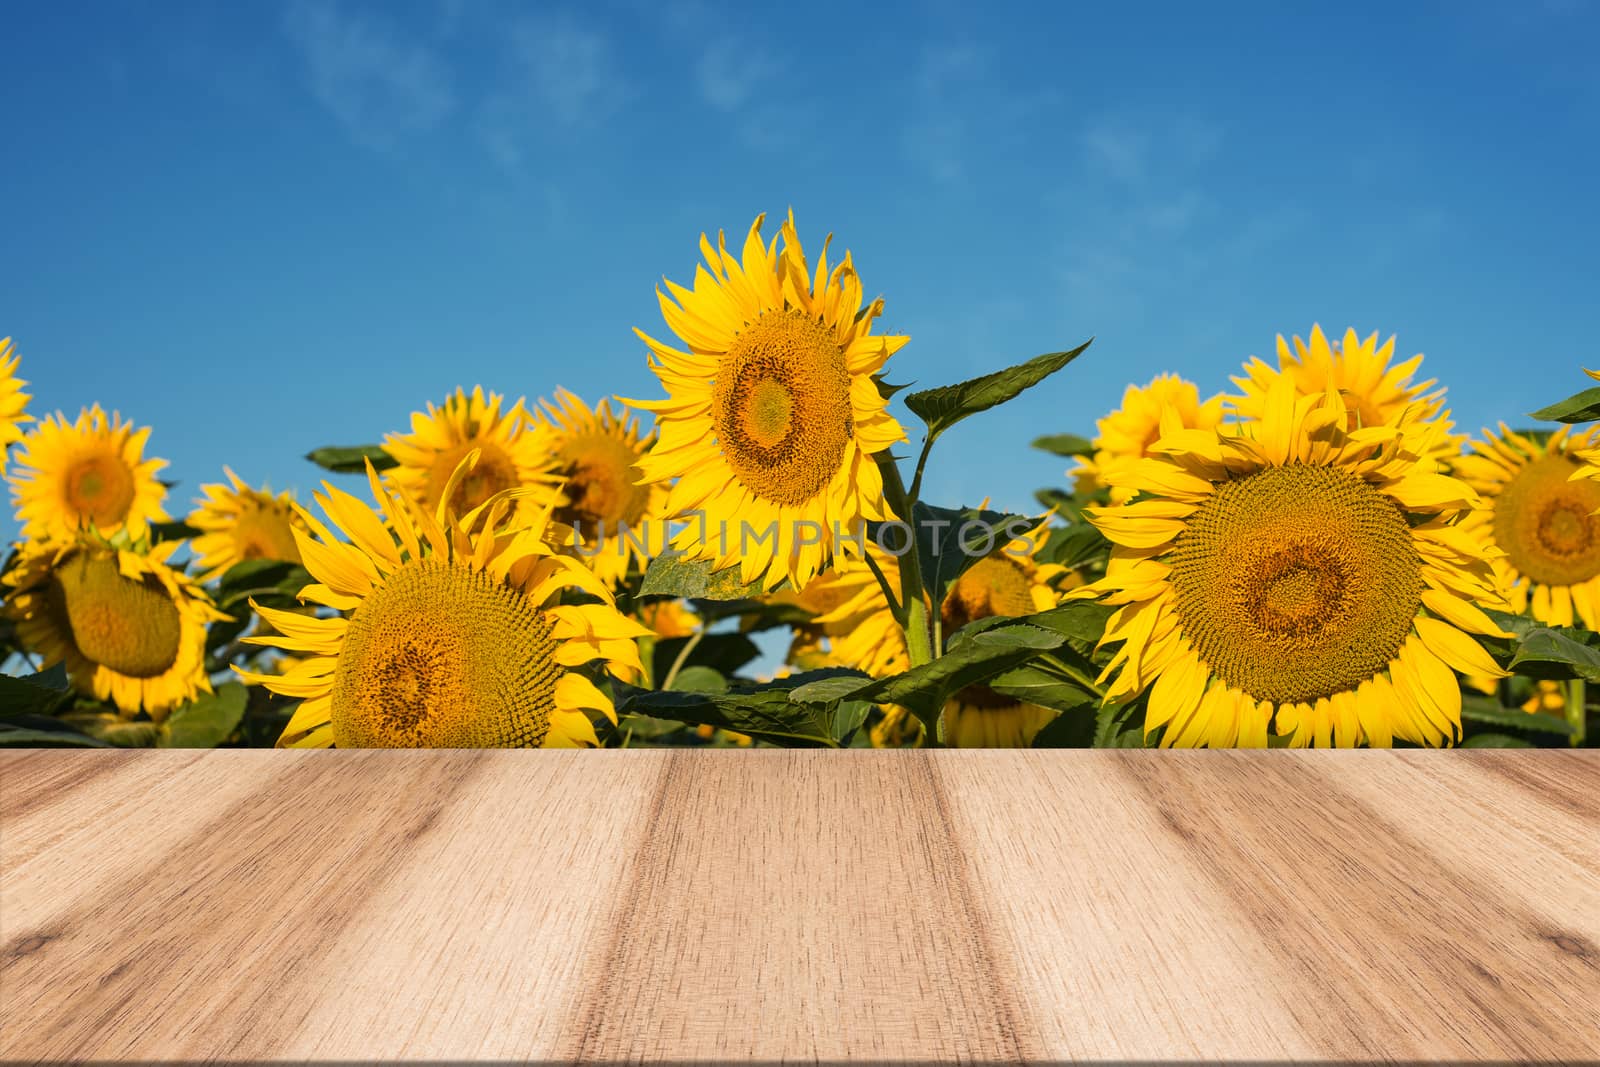 empty wooden table in sunflower field with blue sky. the backgro by DGolbay